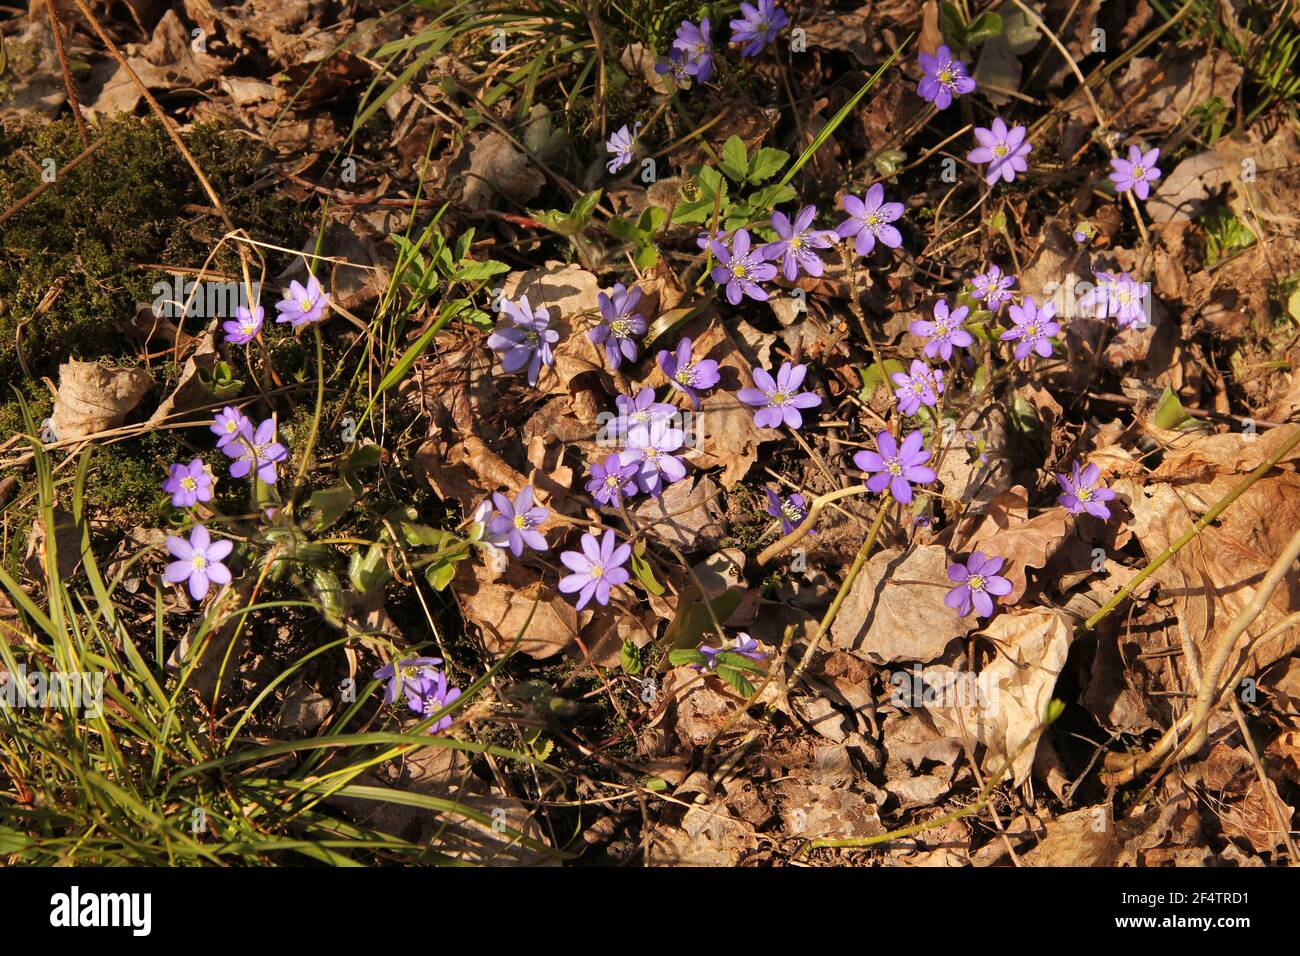 Many small violet blossoms of anemone hepatica, liverwort, kidneywort, pennywort in the background of grass, moss, dried leaves, twigs and nature in t Stock Photo